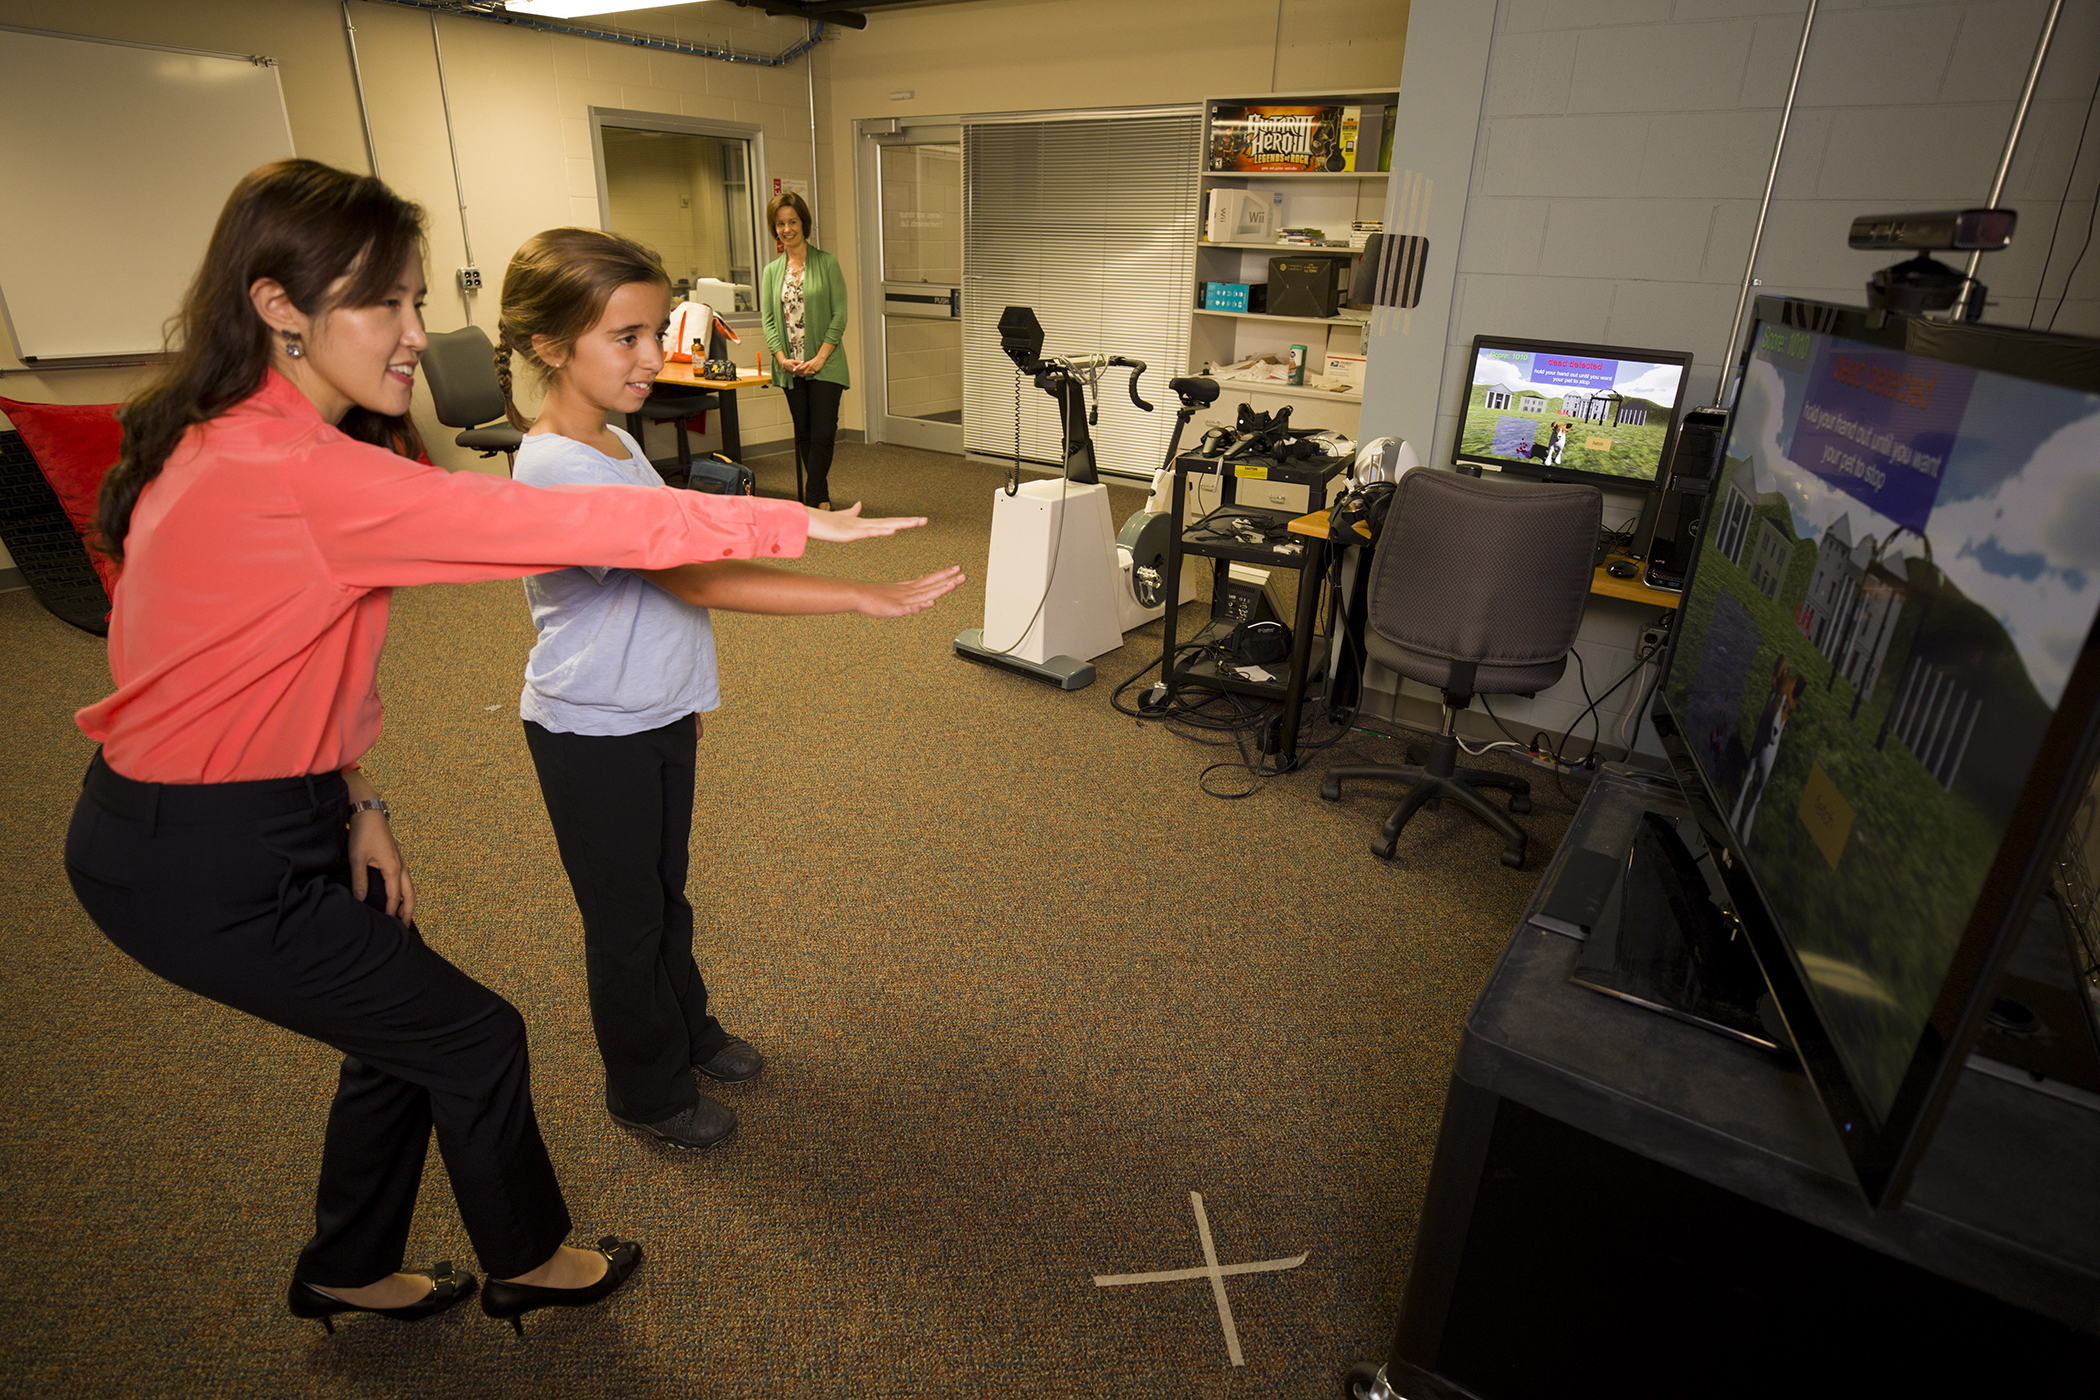 Description: Associate Professor Dr. Sun Joo (Grace) Ahn, left, helps nine year old Maddie Lacey of Watkinsville with interacting with the virtual buddy fitness kiosk in the GAVEL Lab at the Grady College of Journalism.
Date of Photo: 9/1/2017
Credit: Andrew Davis Tucker, University of Georgia
Photographic Services File: 35137-028

The University of Georgia owns the rights to this image or has permission to redistribute this image. Permission to use this image is granted for internal UGA publications and promotions and for a one-time use for news purposes. Separate permission and payment of a fee is required to use any image for any other purpose, including but not limited to, commercial, advertising or illustrative purposes. Unauthorized use of any of these copyrighted photographs is unlawful and may subject the user to civil and criminal penalties. Possession of this image signifies agreement to all the terms described above.